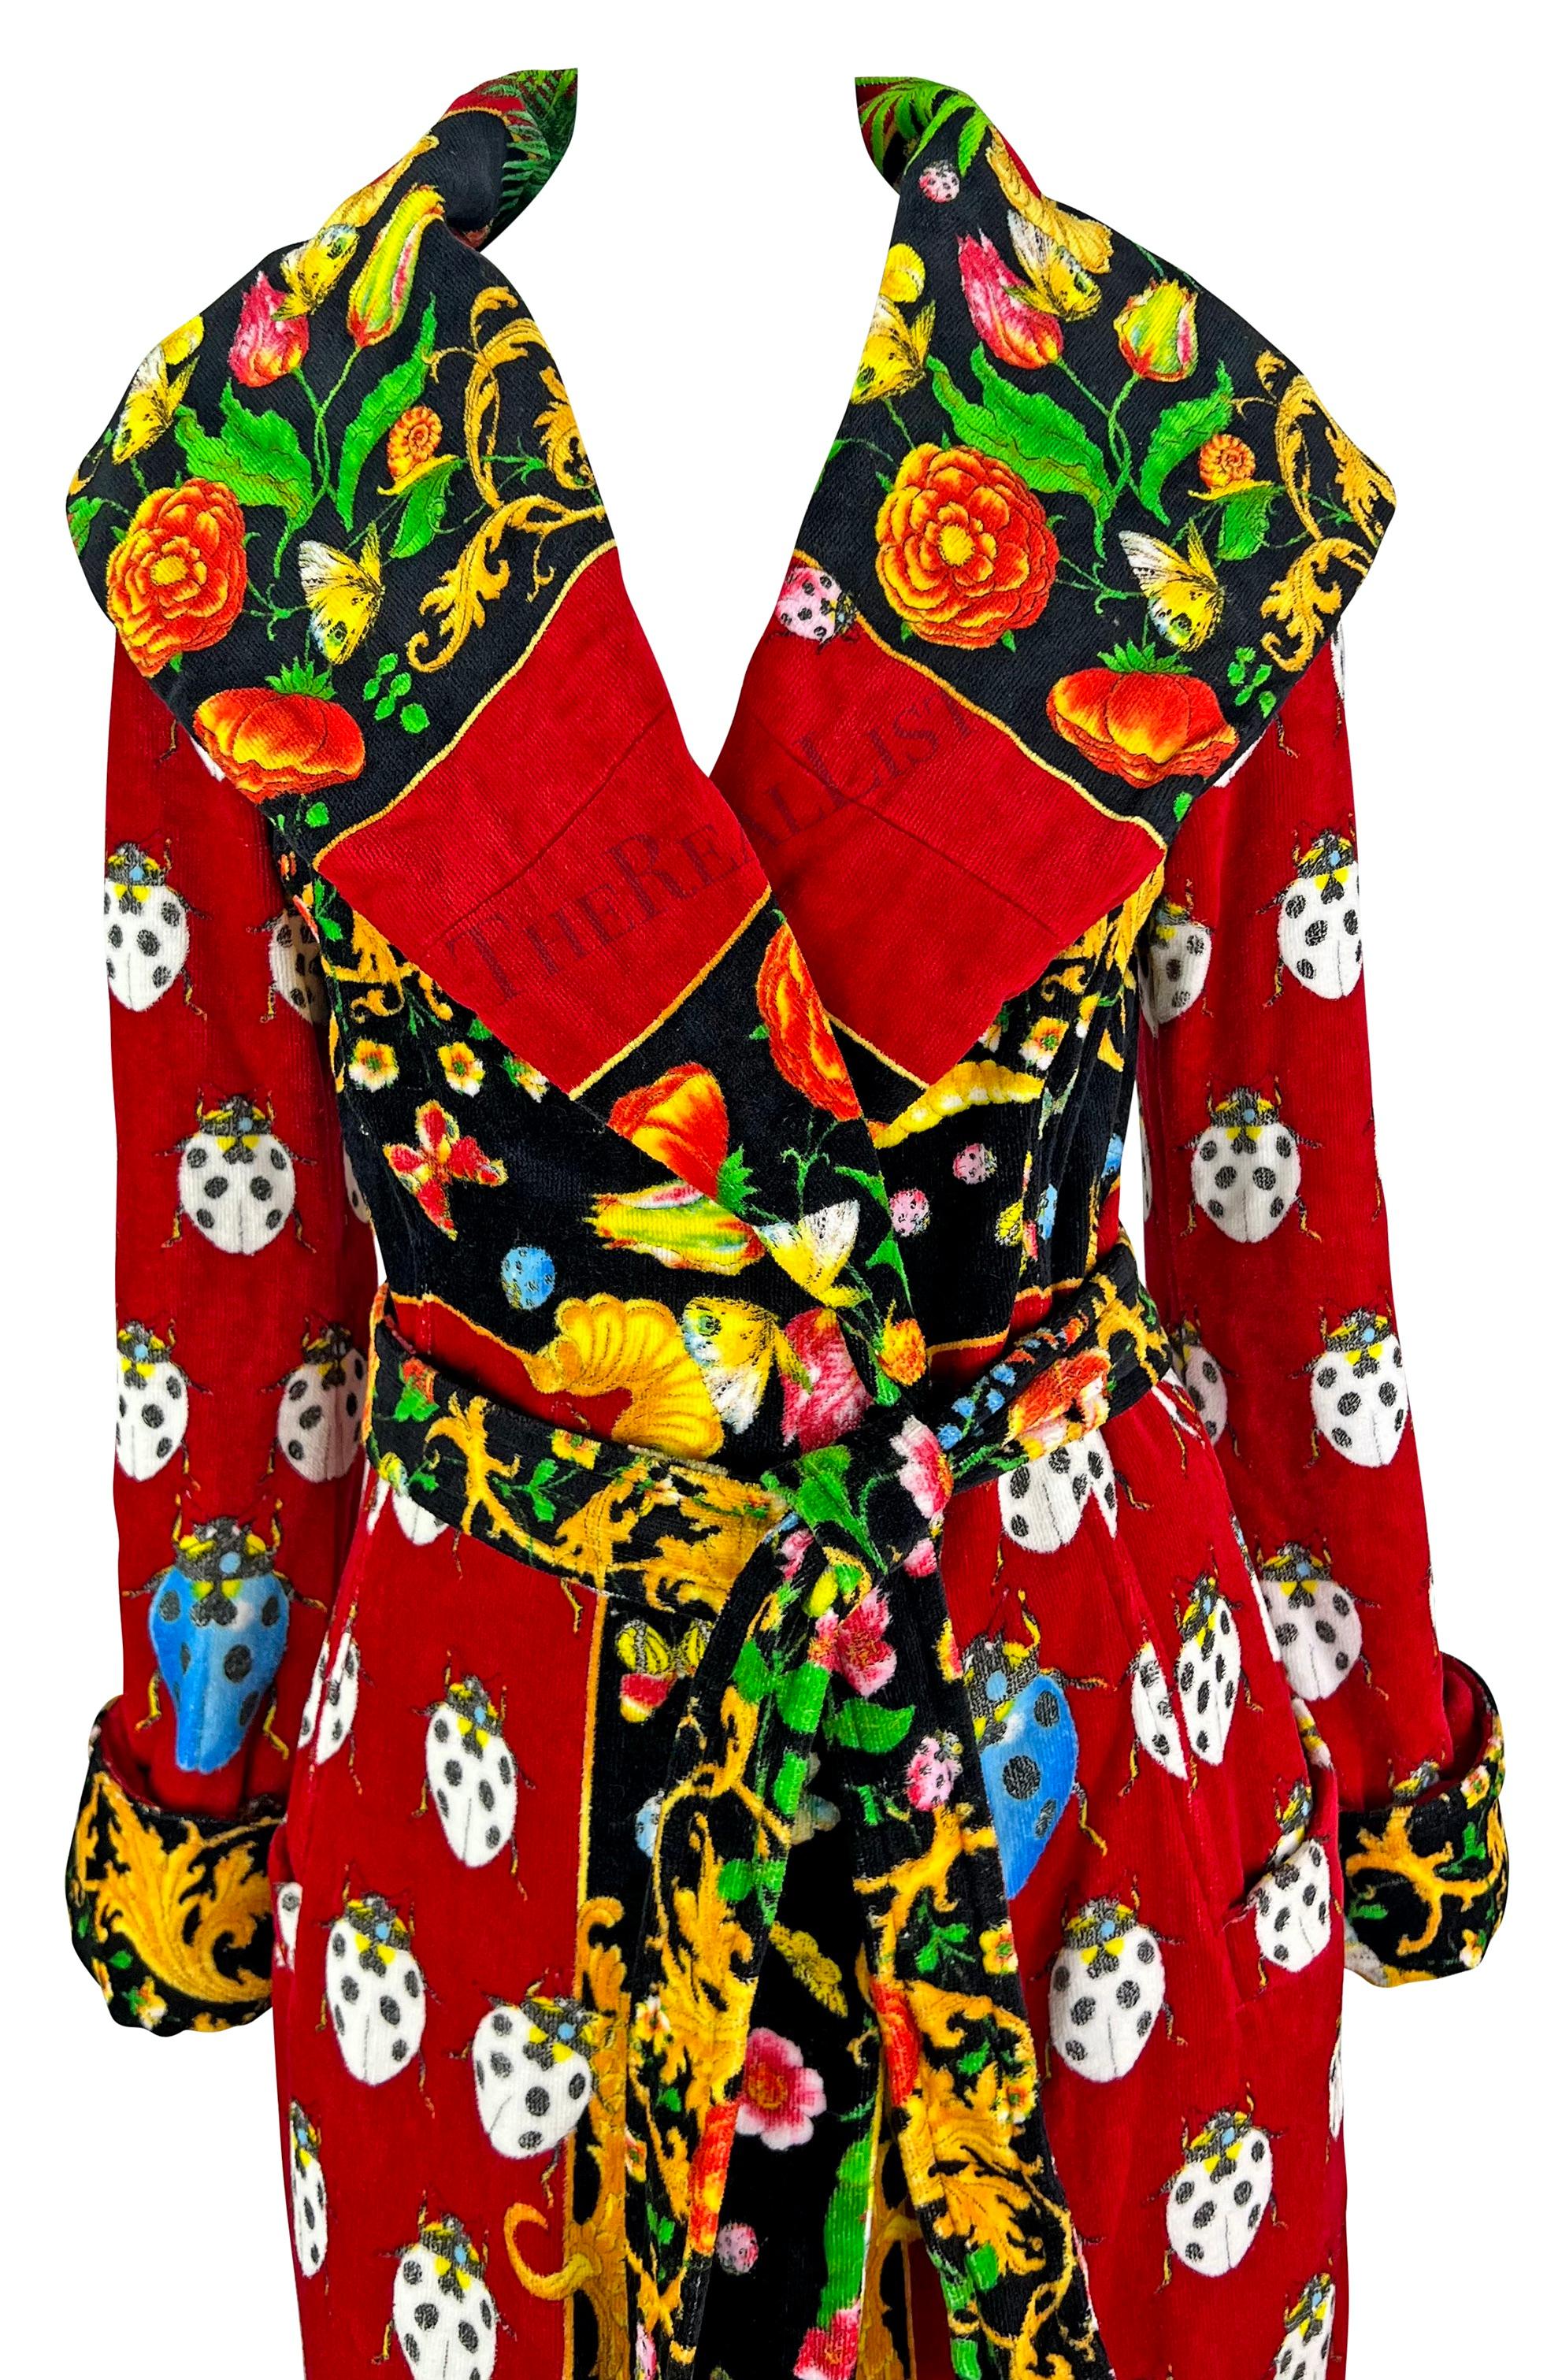 S/S 1995 Gianni Versace Red Lady Bug Print Corset Boned Terrycloth Robe In Excellent Condition For Sale In West Hollywood, CA